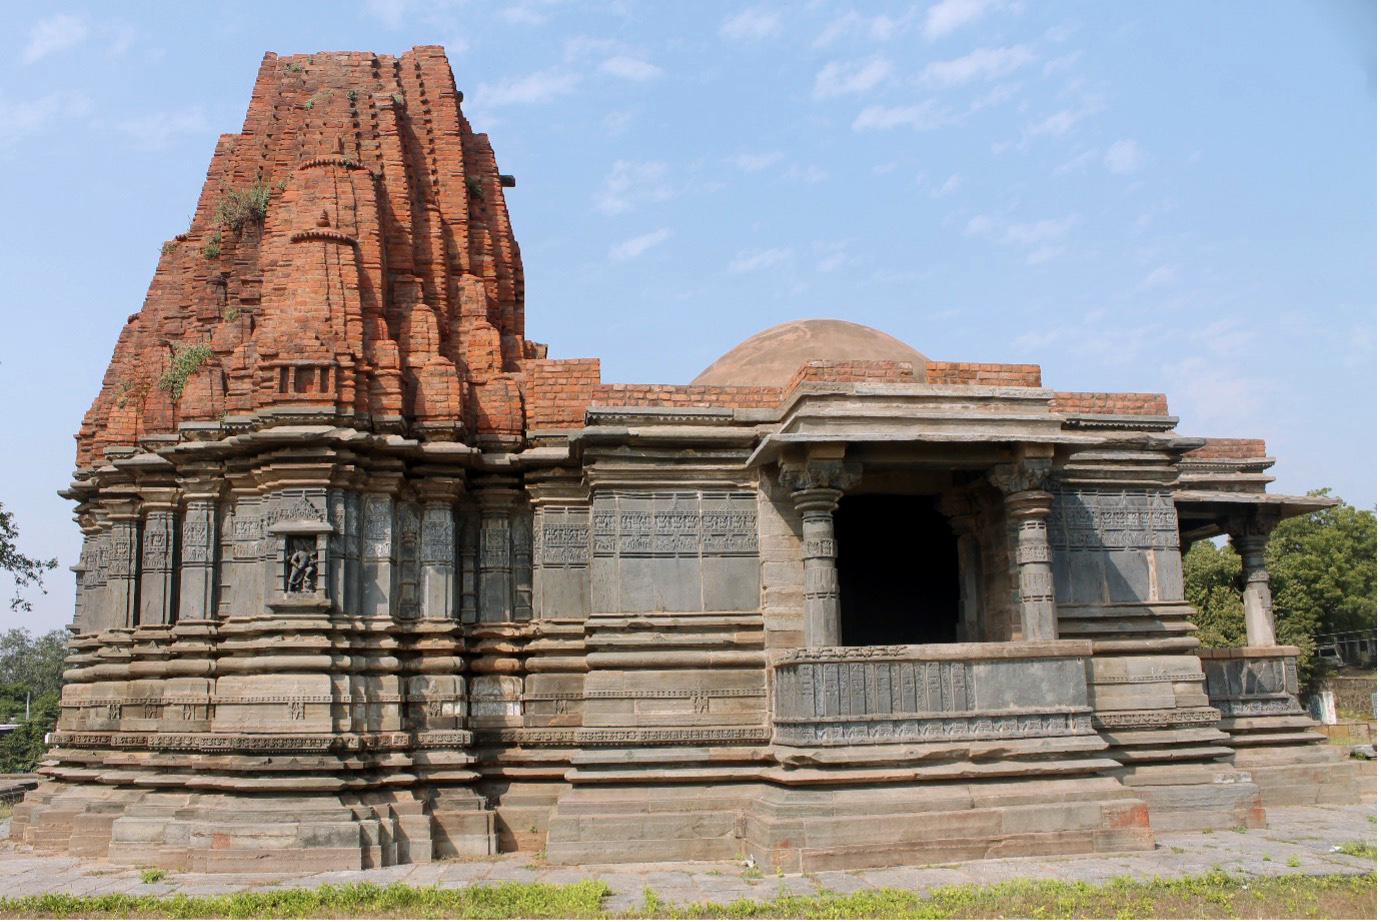 Image 2: North facing elevation of the Mandaleshwar Mahadev Temple which has the main temple body built in stone and the shikhara in brick.